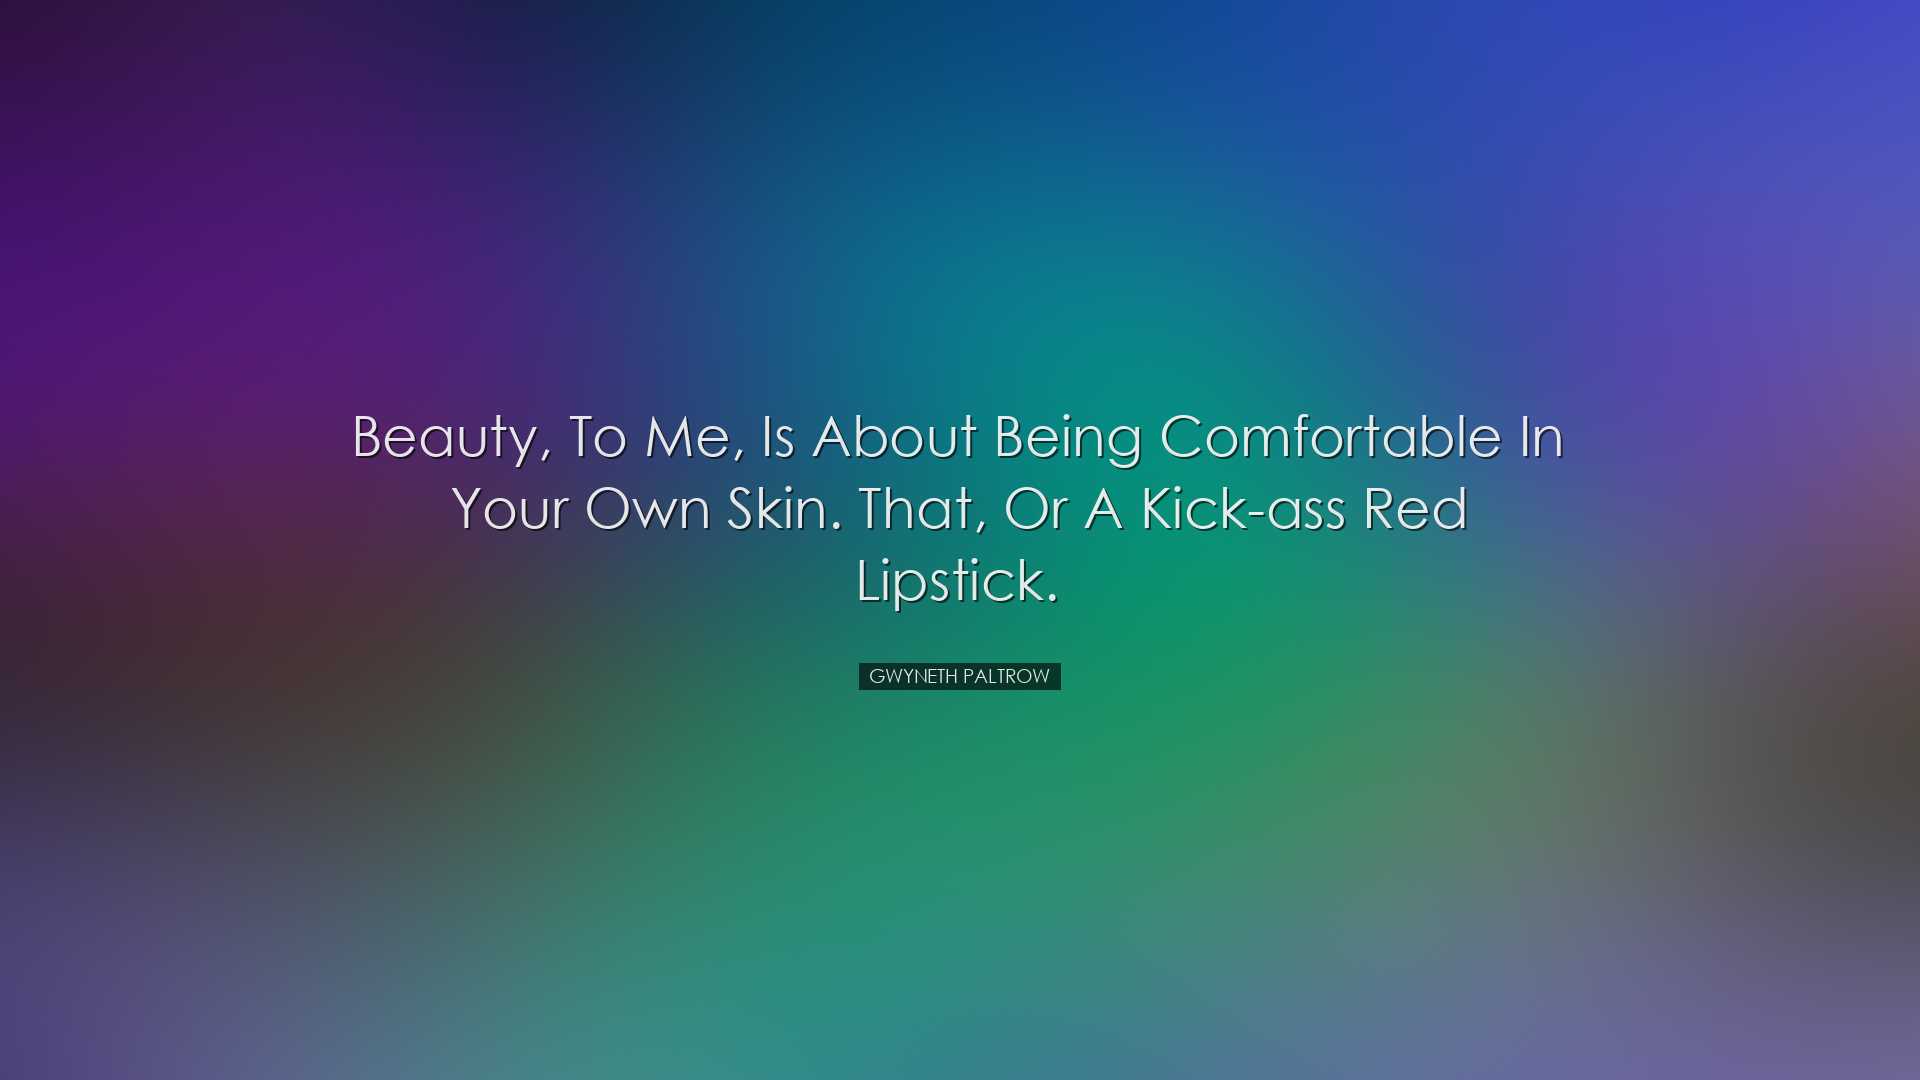 Beauty, to me, is about being comfortable in your own skin. That,